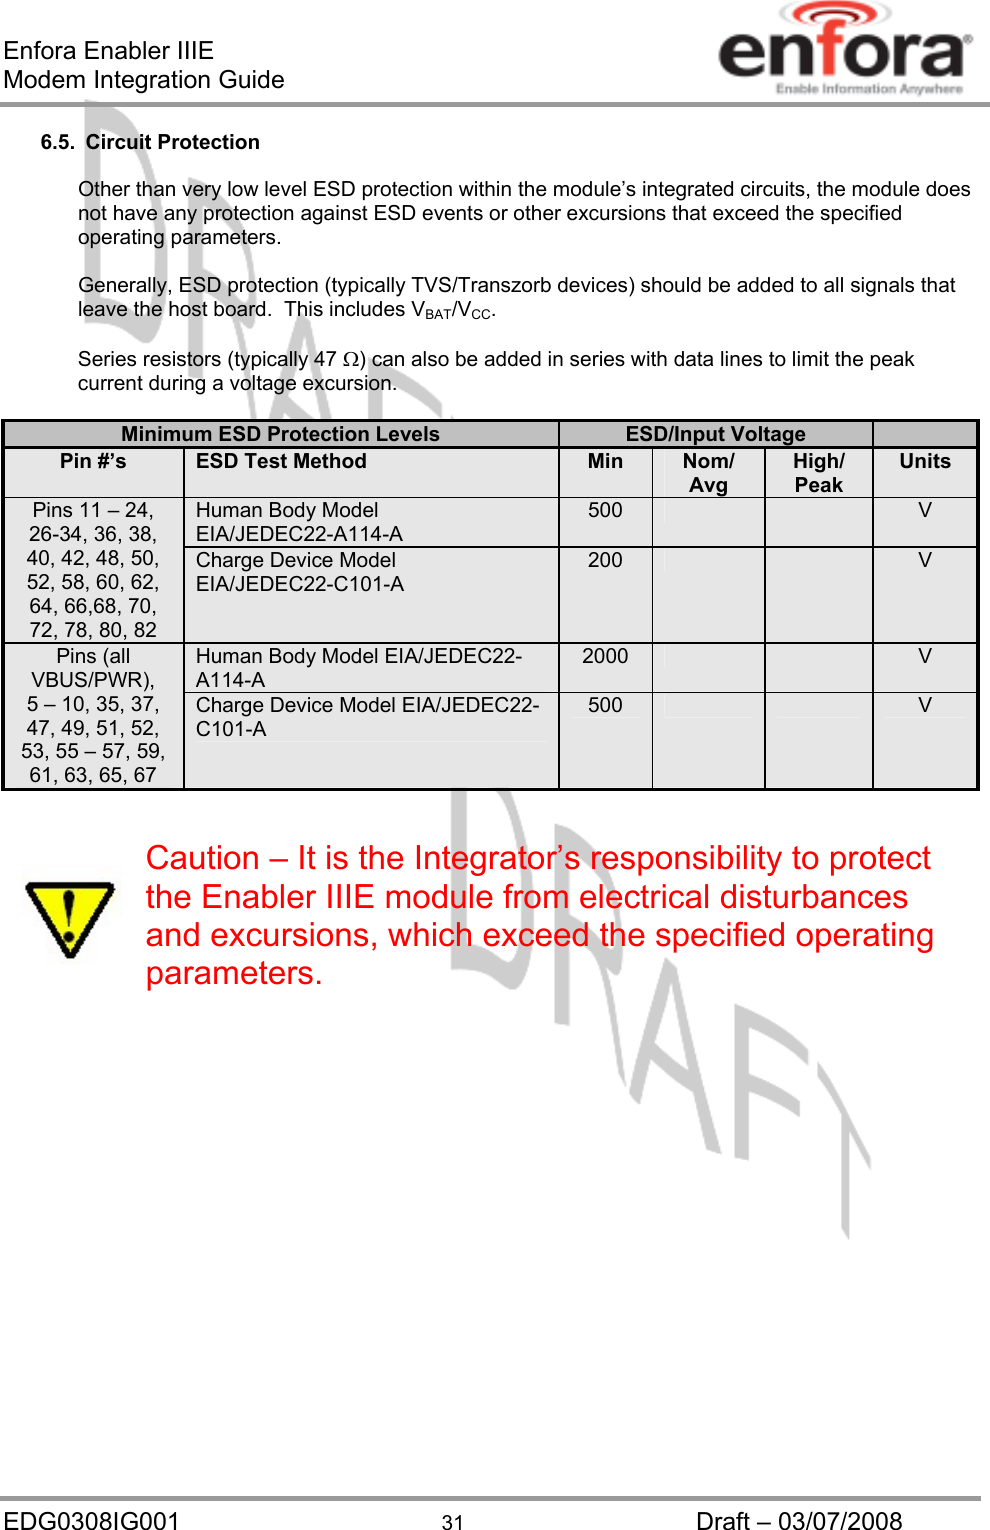 Enfora Enabler IIIE Modem Integration Guide 6.5. Circuit Protection  Other than very low level ESD protection within the module’s integrated circuits, the module does not have any protection against ESD events or other excursions that exceed the specified operating parameters.  Generally, ESD protection (typically TVS/Transzorb devices) should be added to all signals that leave the host board.  This includes V /V . BAT CC Series resistors (typically 47 Ω) can also be added in series with data lines to limit the peak current during a voltage excursion.   EDG0308IG001  31  Draft – 03/07/2008 Minimum ESD Protection Levels  ESD/Input Voltage   Pin #’s  ESD Test Method  Min  Nom/ Avg High/ Peak Units Human Body Model EIA/JEDEC22-A114-A 500      V Pins 11 – 24, 26-34, 36, 38, 40, 42, 48, 50, 52, 58, 60, 62, 64, 66,68, 70, 72, 78, 80, 82 Charge Device Model EIA/JEDEC22-C101-A 200      V Human Body Model EIA/JEDEC22-A114-A 2000      V Pins (all VBUS/PWR), 5 – 10, 35, 37, 47, 49, 51, 52, 53, 55 – 57, 59, 61, 63, 65, 67 Charge Device Model EIA/JEDEC22-C101-A 500      V   Caution – It is the Integrator’s responsibility to protect the Enabler IIIE module from electrical disturbances and excursions, which exceed the specified operating parameters.   